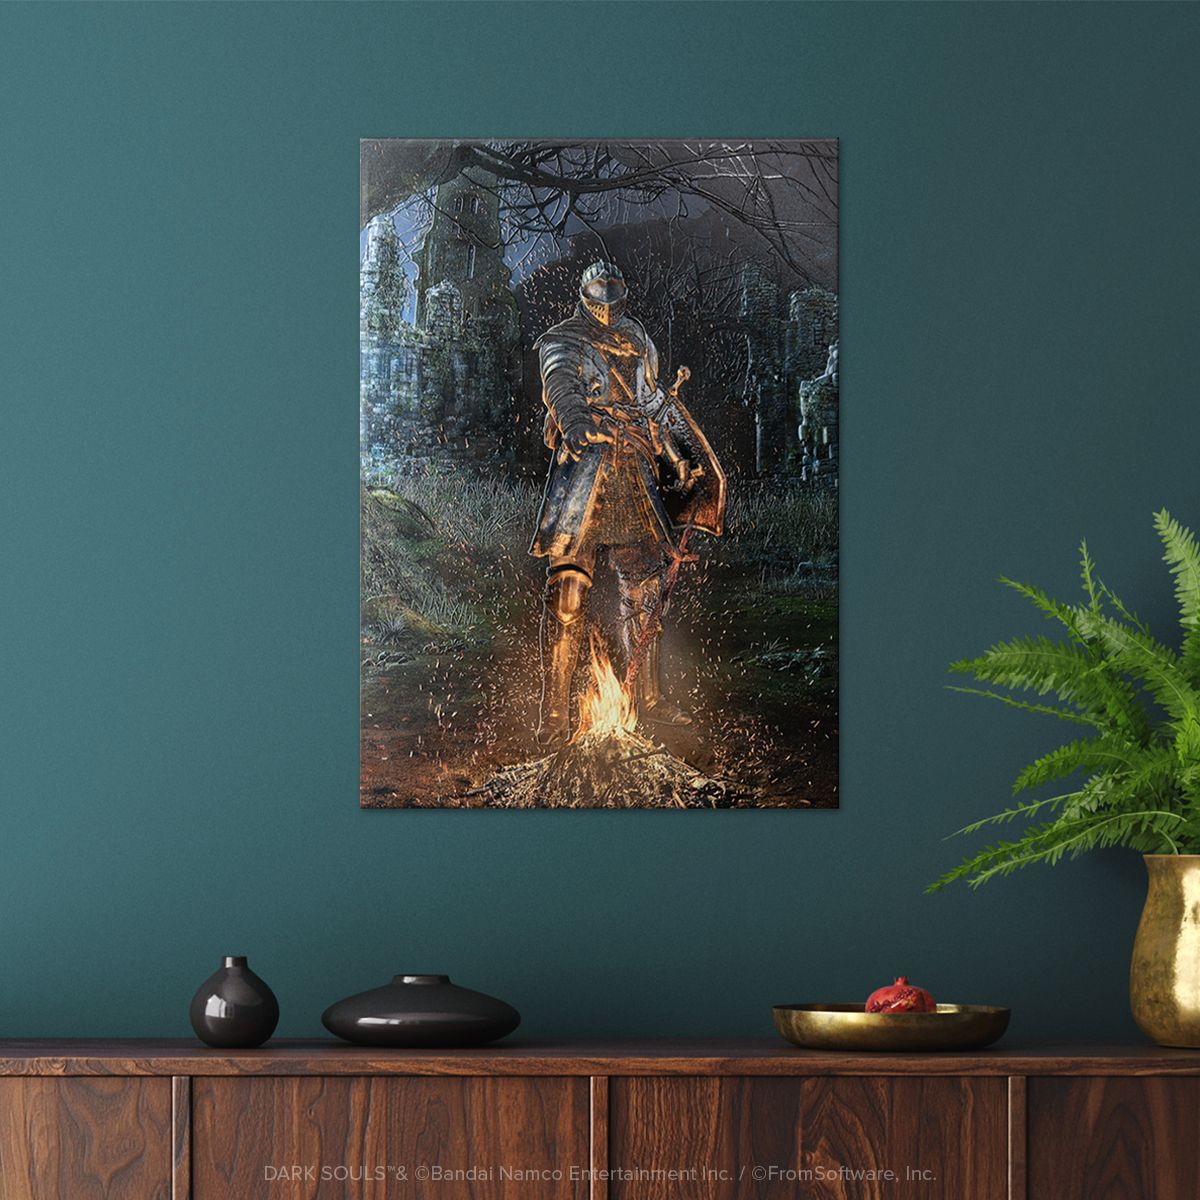 Displate Metal Posters Change Your Wall Change Your World